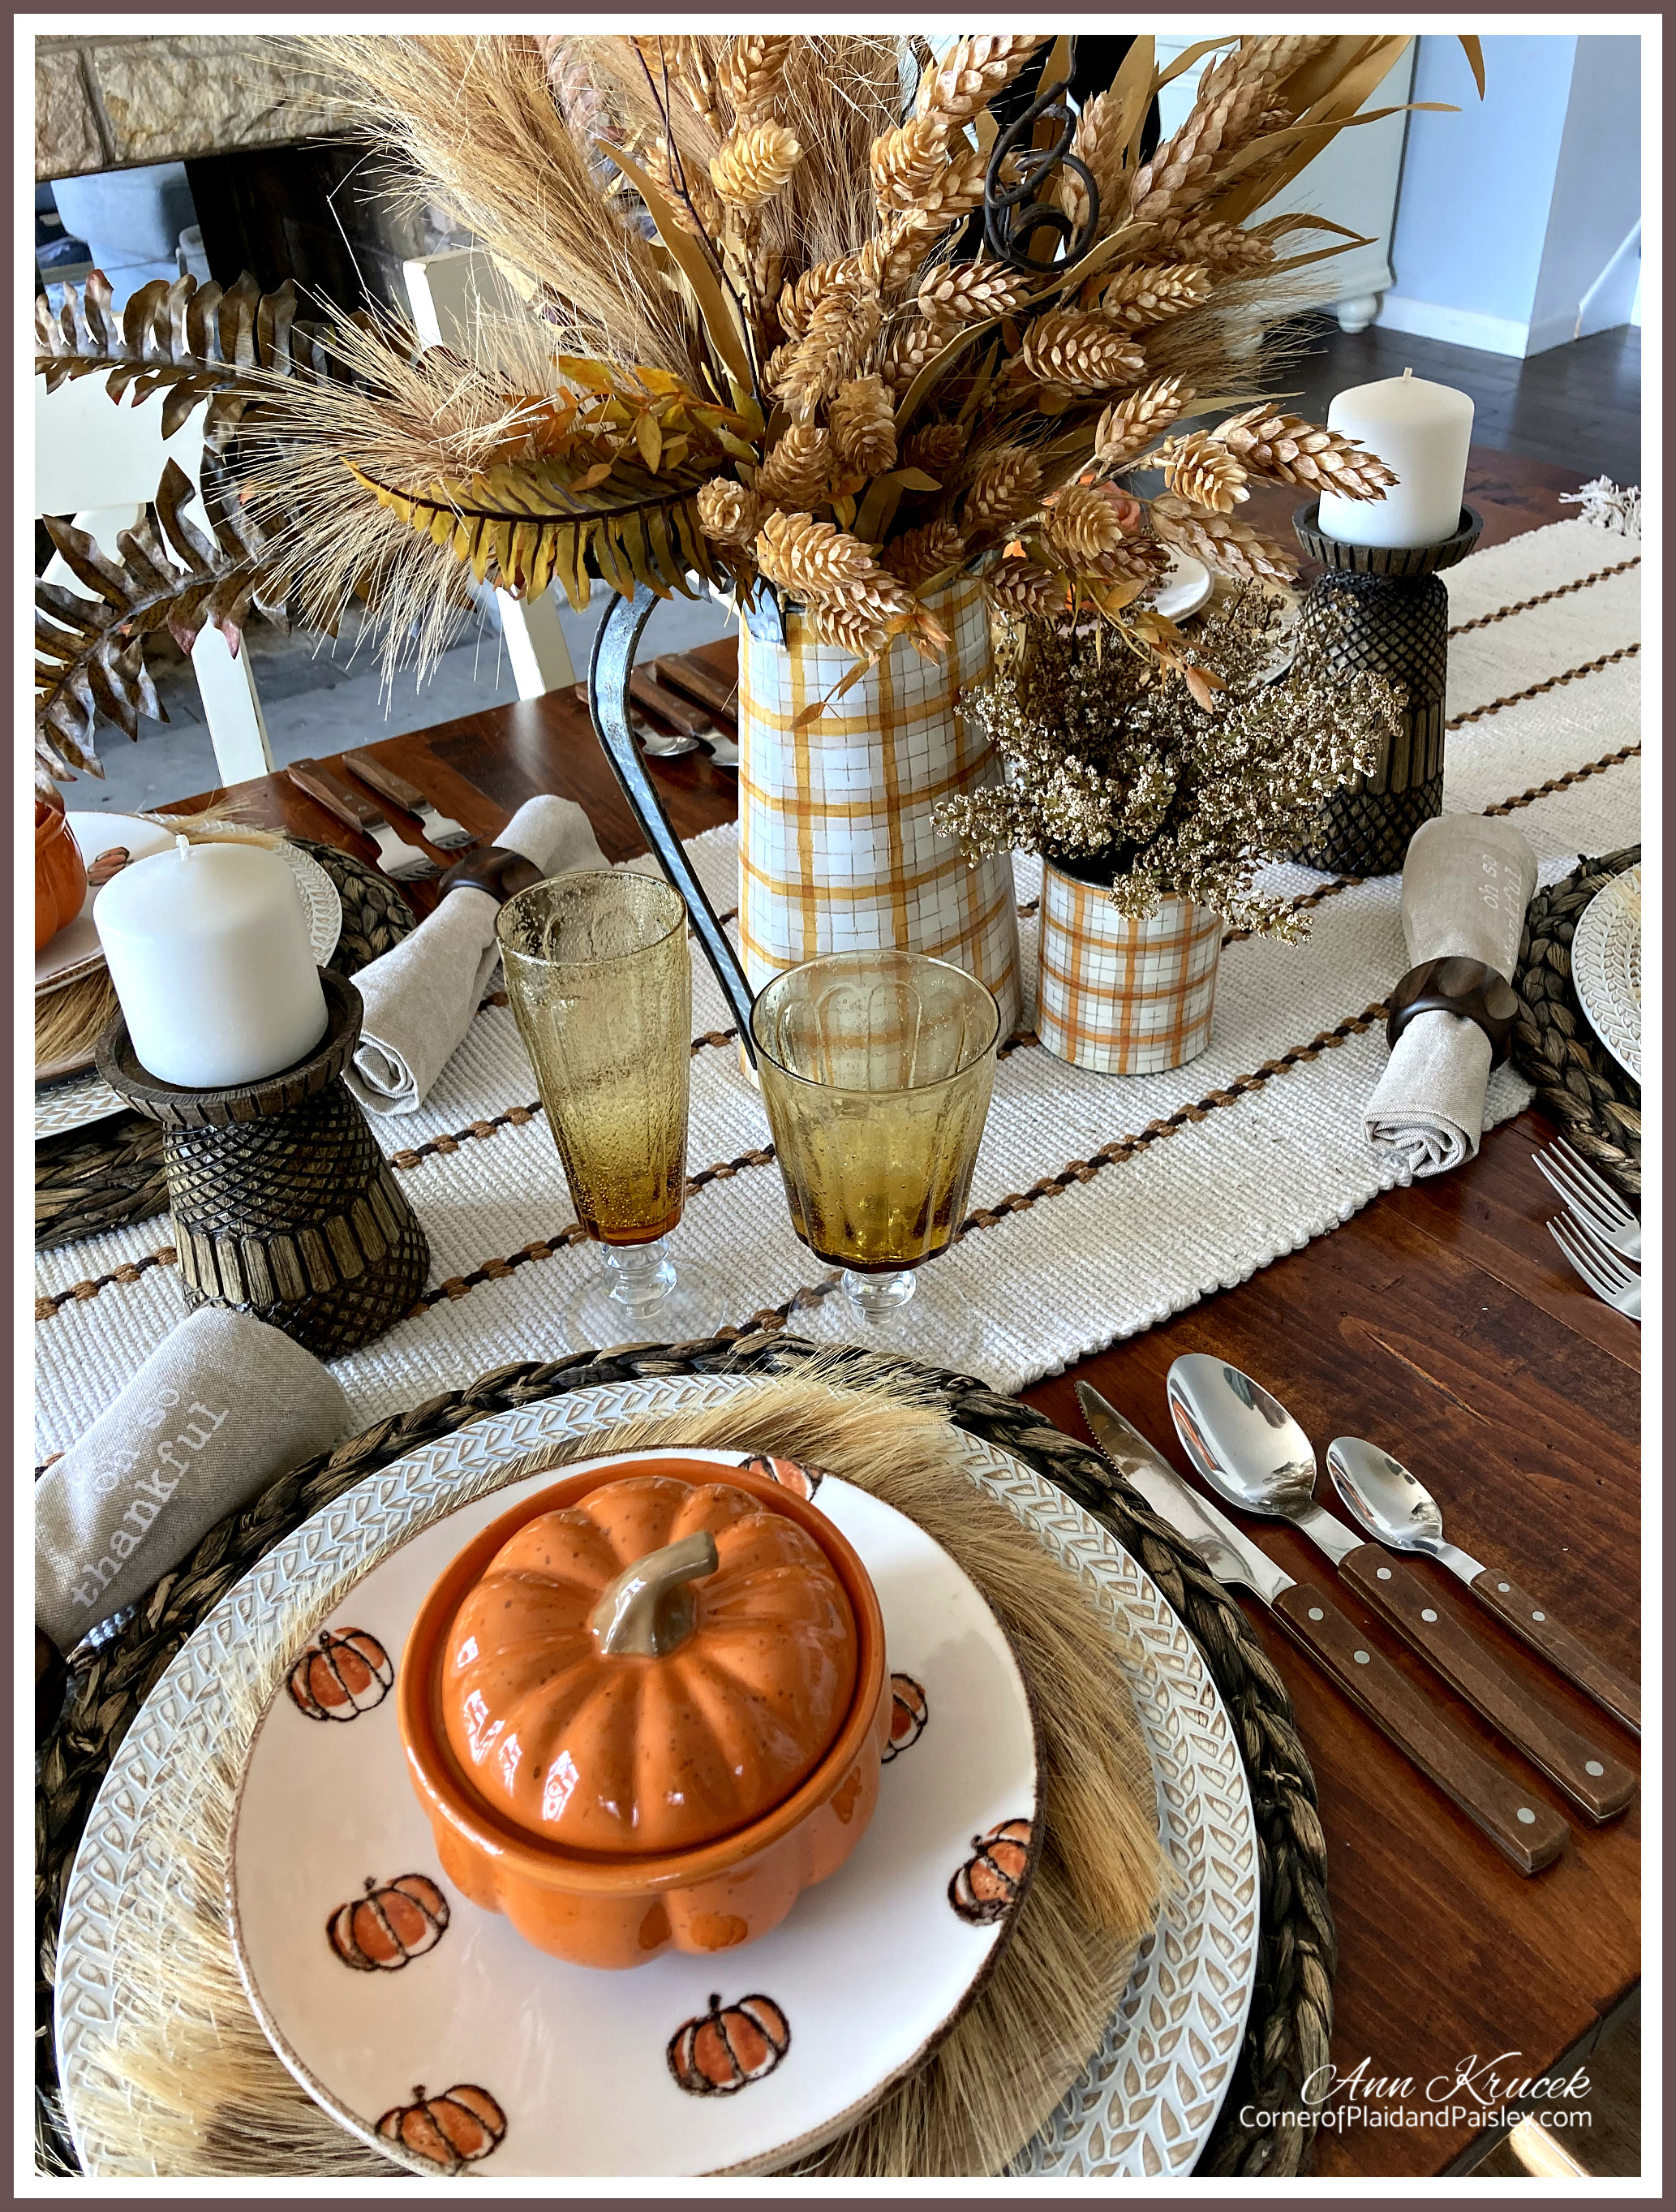 Big Dot of Happiness Fall Friends Thanksgiving - Friendsgiving Party Round  Table Decorations - Paper Chargers - Place Setting For 12